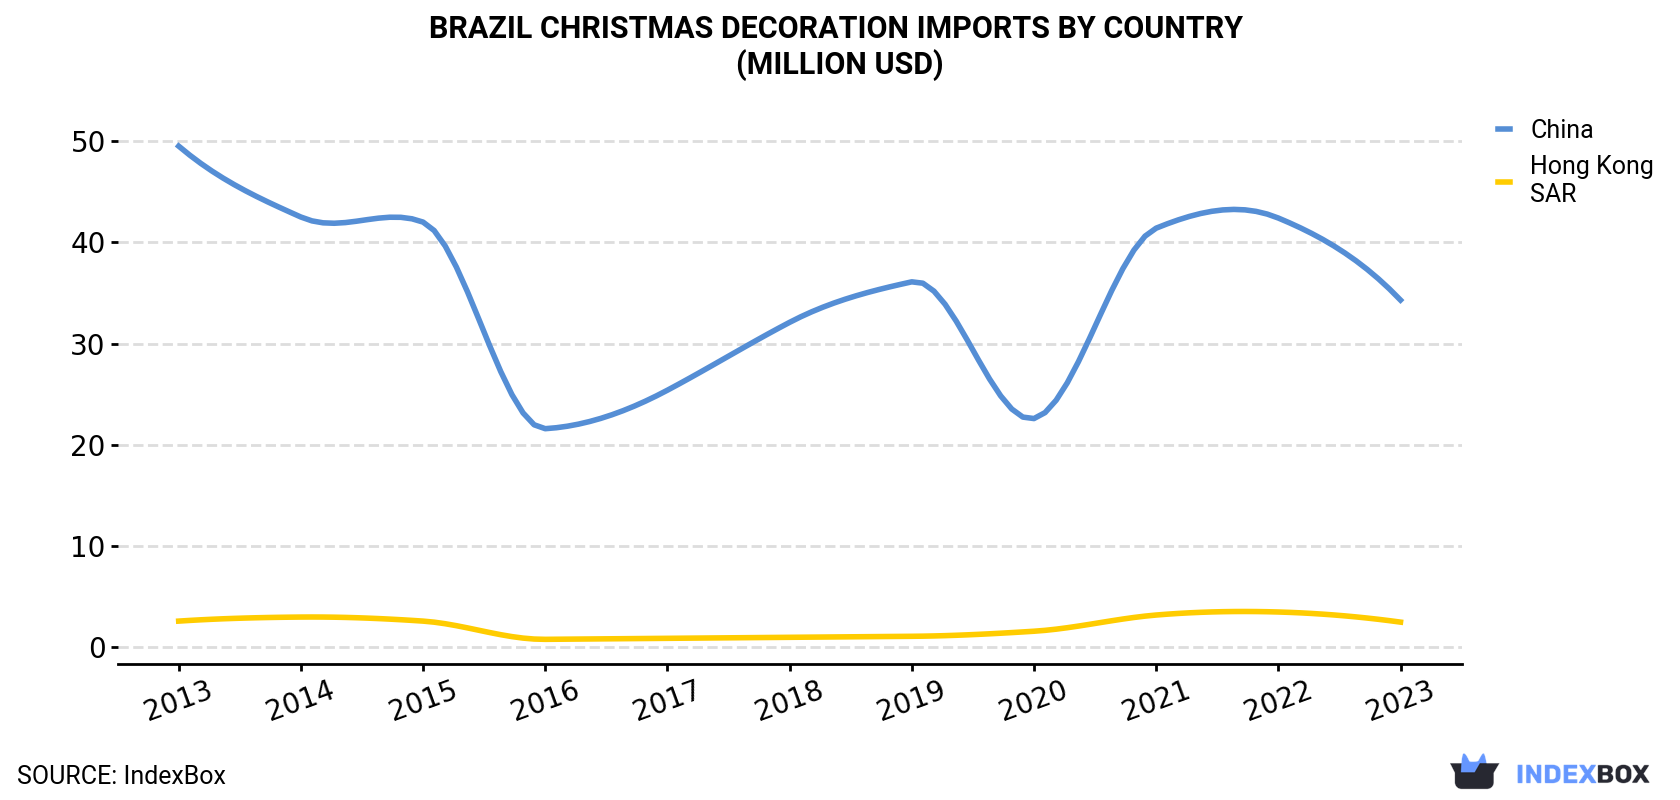 Brazil Christmas Decoration Imports By Country (Million USD)